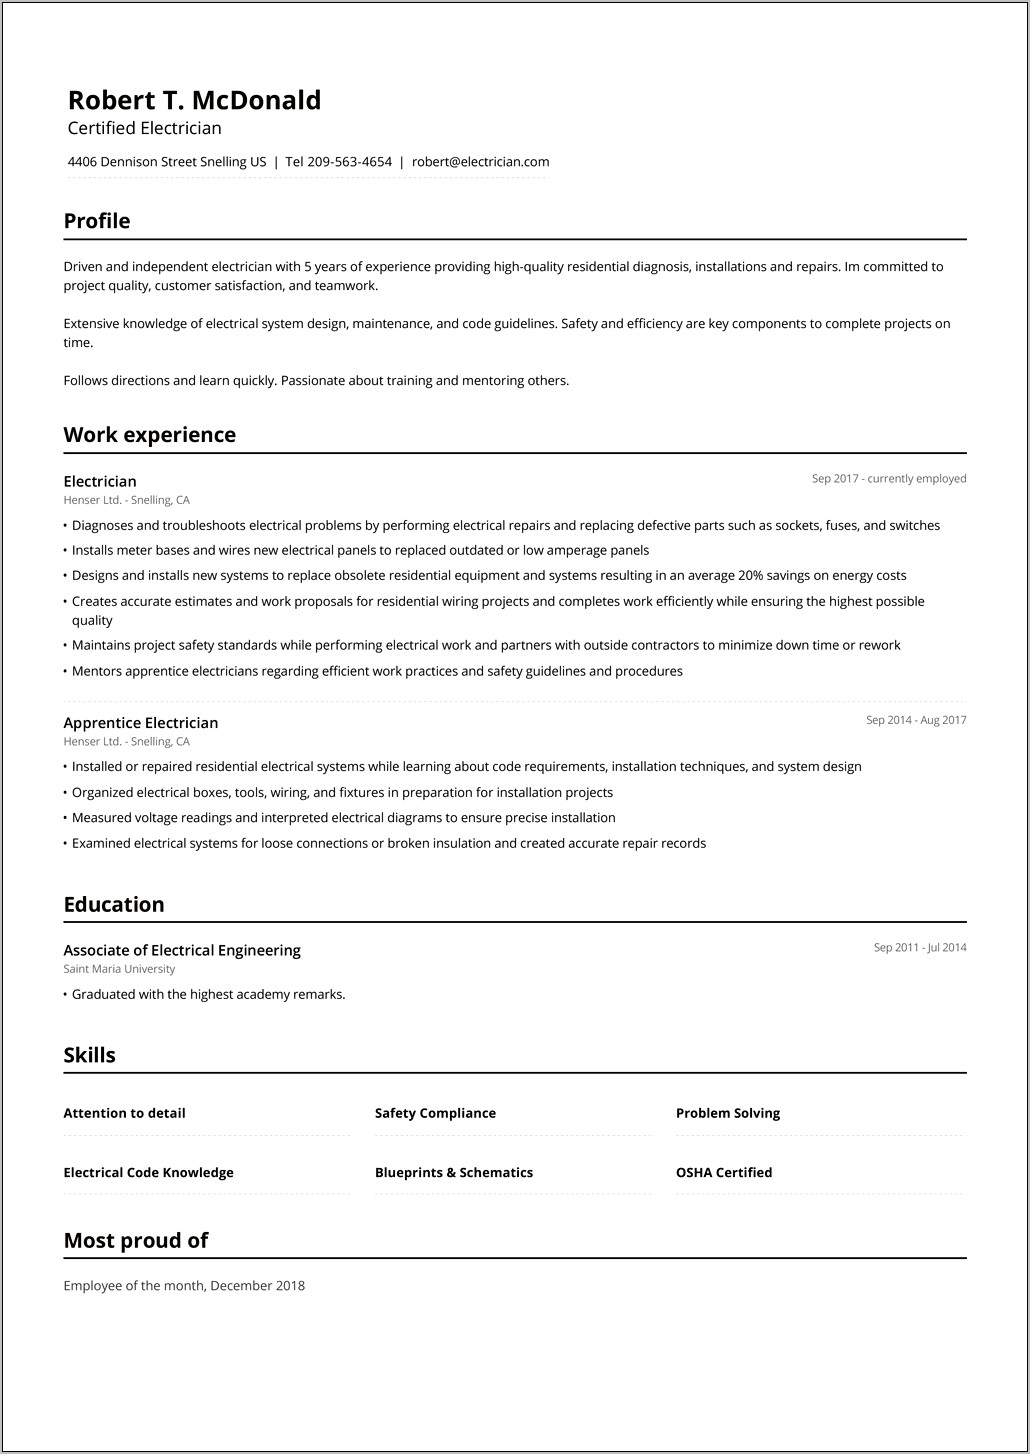 Free Resume Creator Online For Electrician